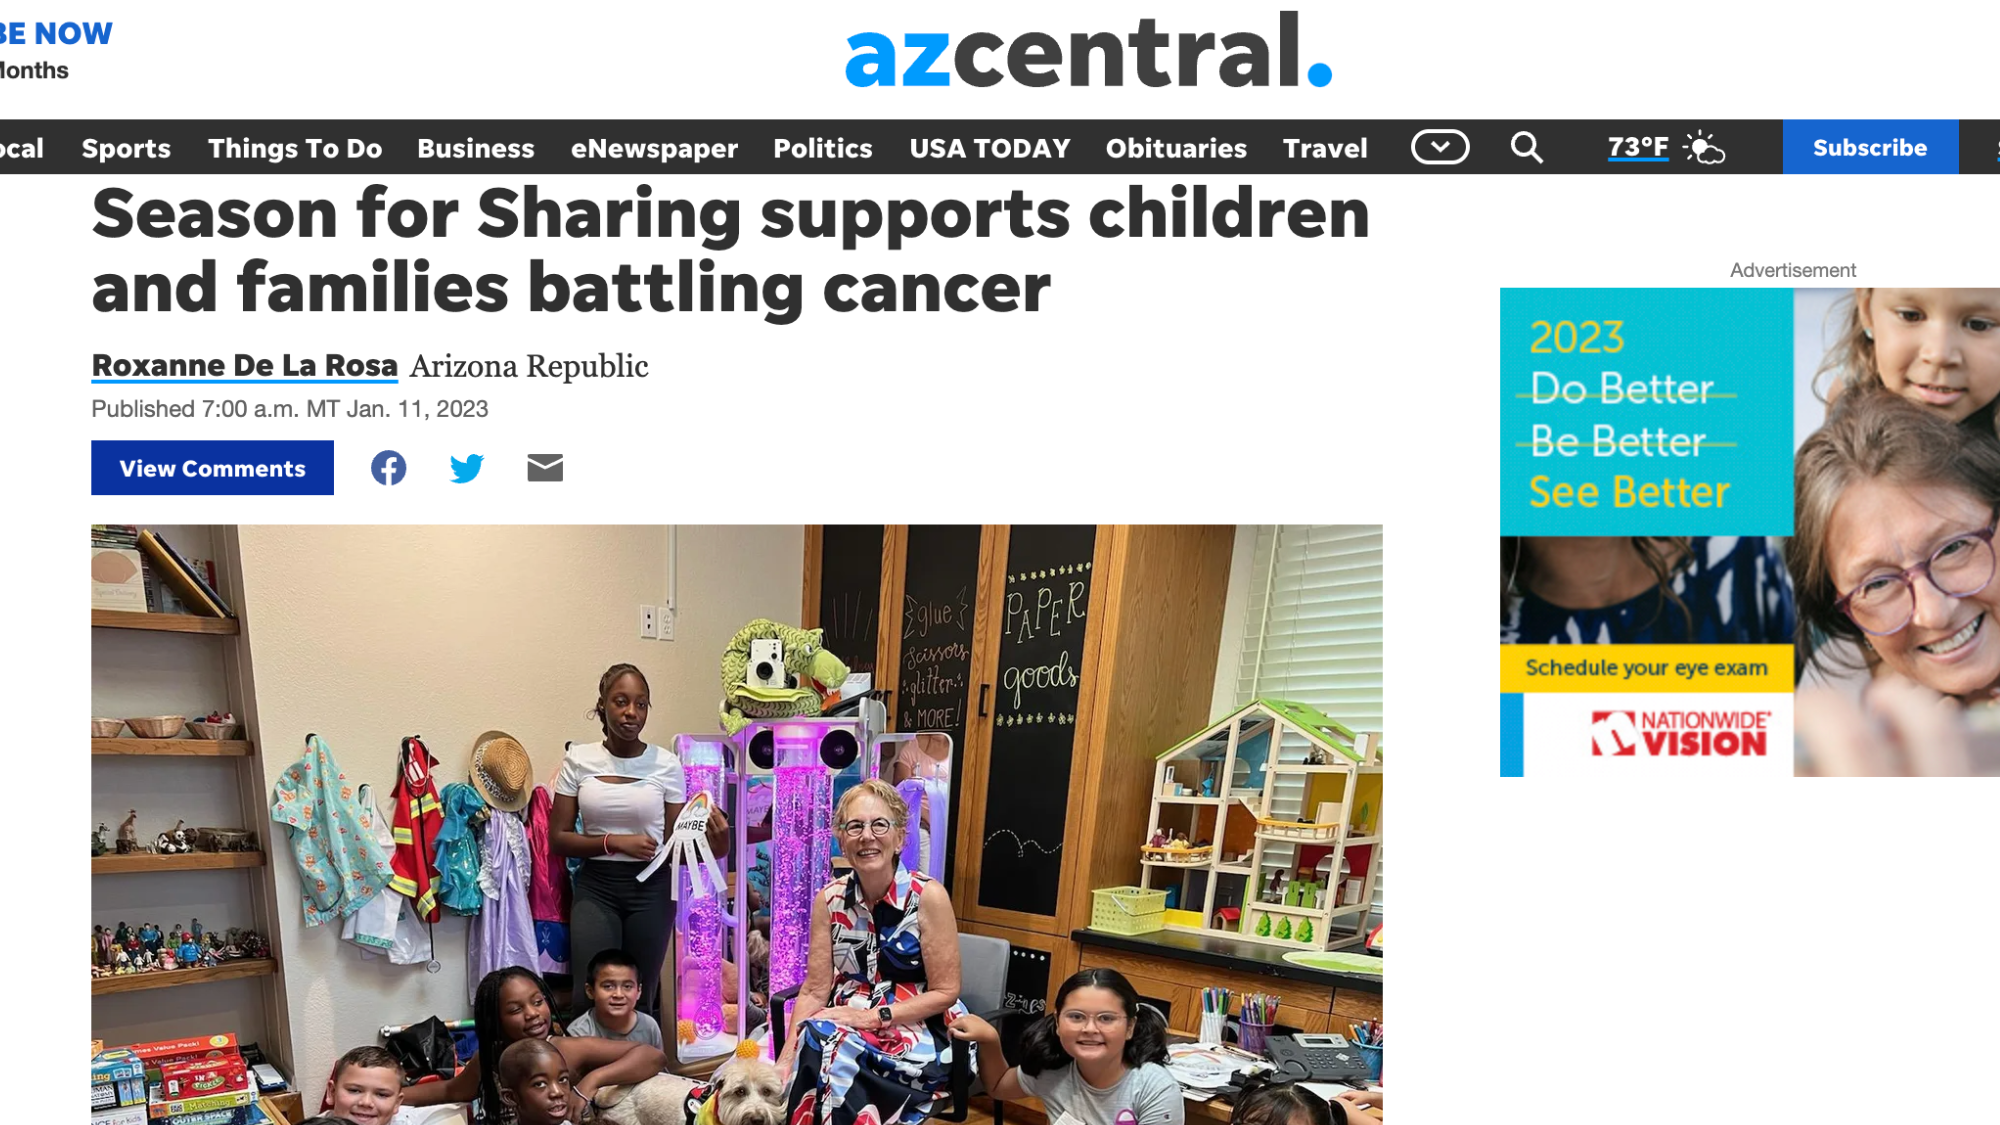 az central: "Season for Sharing supports children and families battling cancer" (Copy)